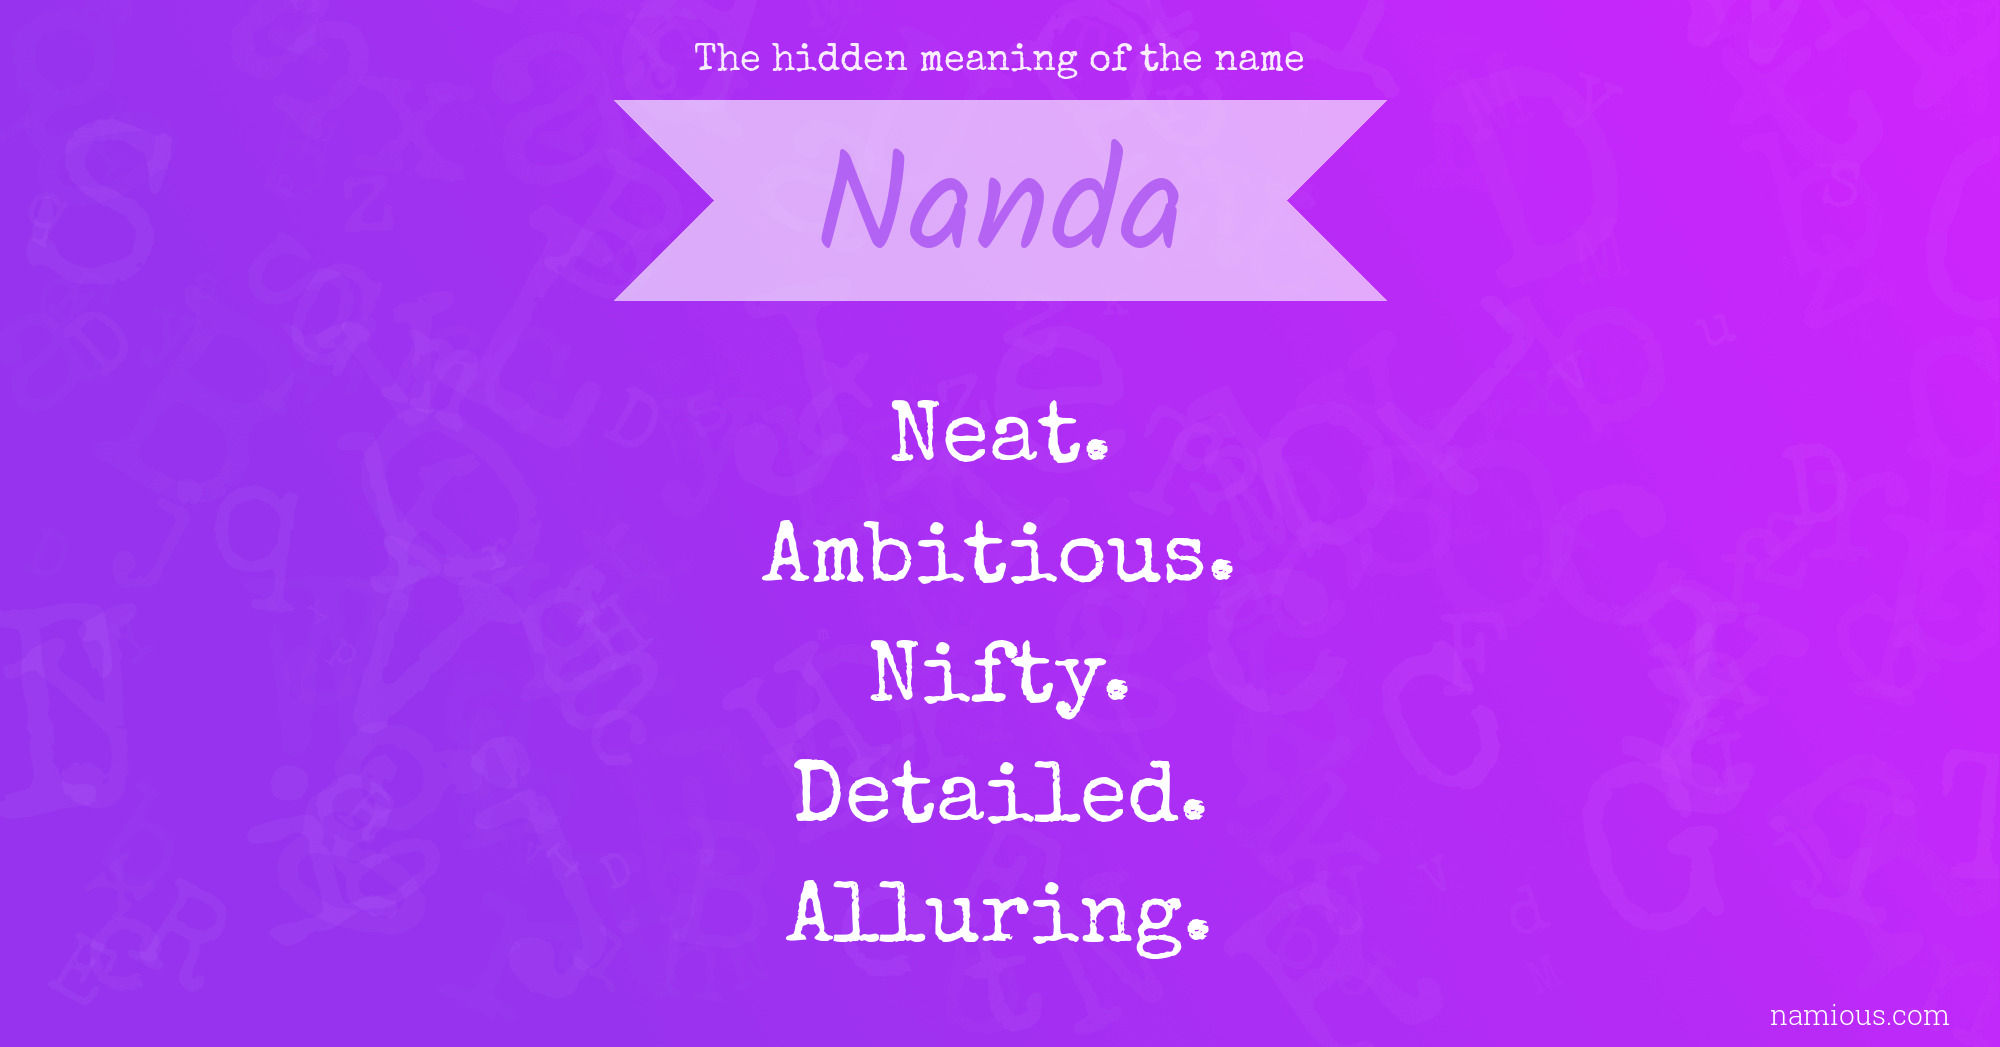 The hidden meaning of the name Nanda